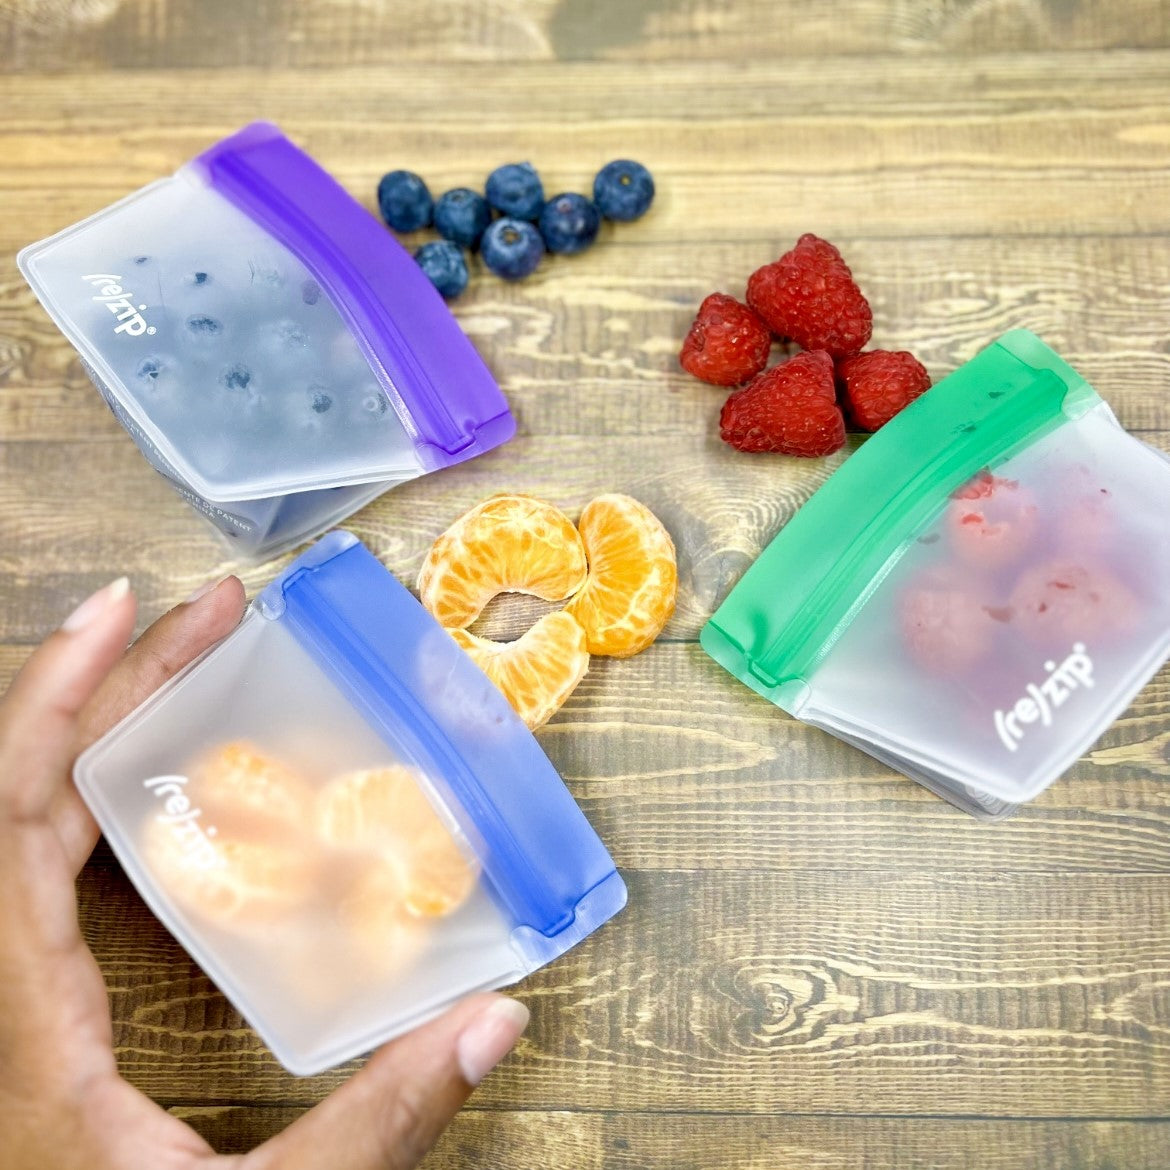 rezip mini pocket-sized snack leak proof reusable food storage bag great for school, lunches, on the go, picnics, playgrounds